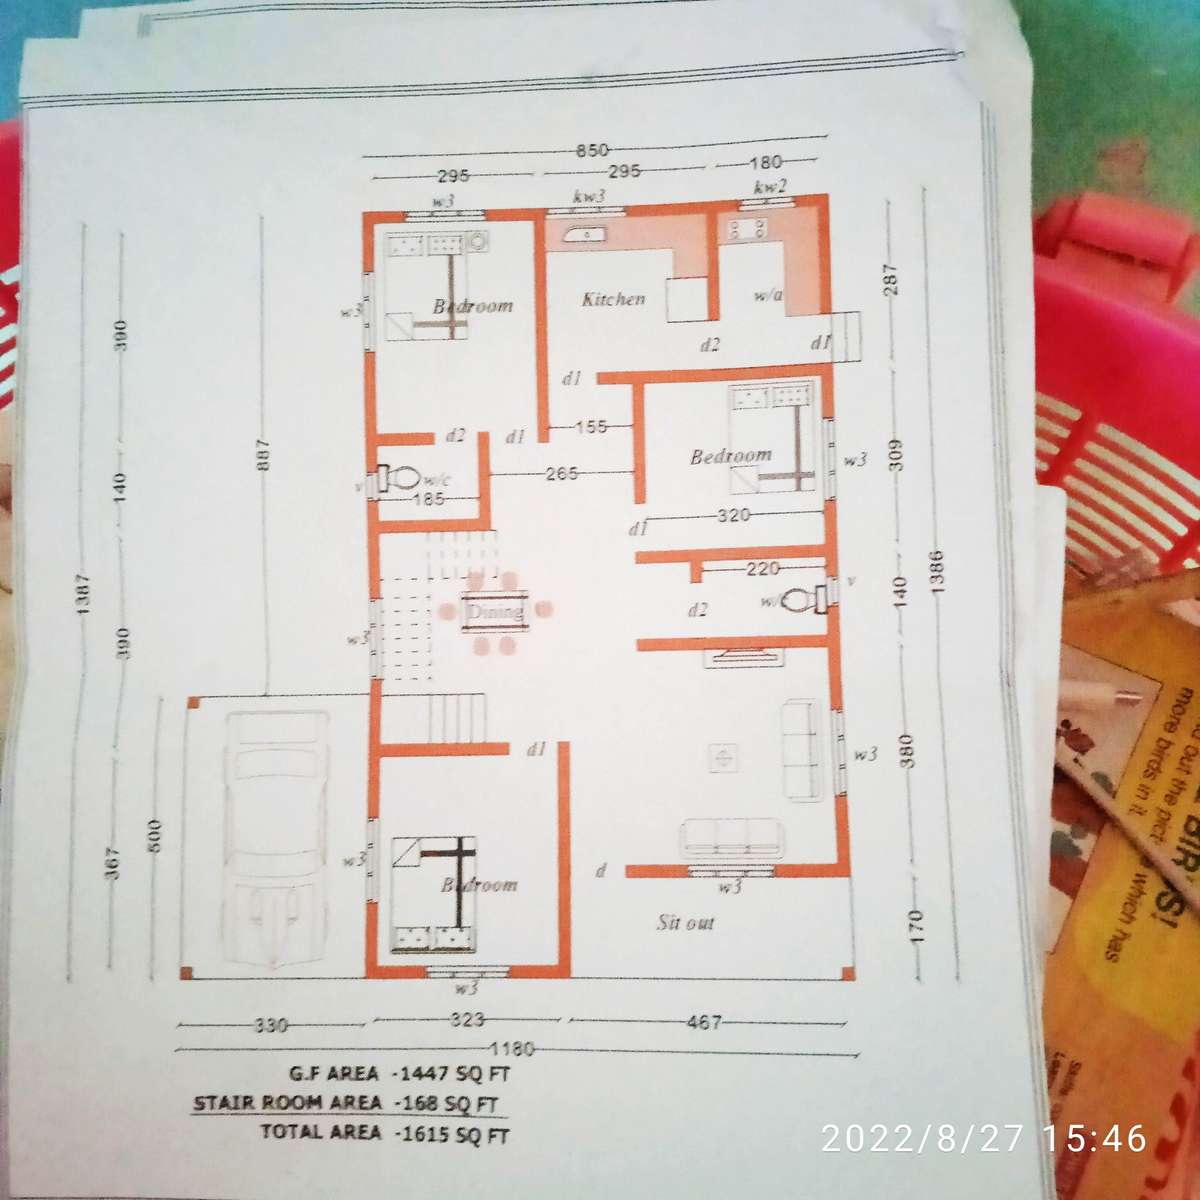 Kindly please provide estimate cost  for interior design and gypsum work completion.